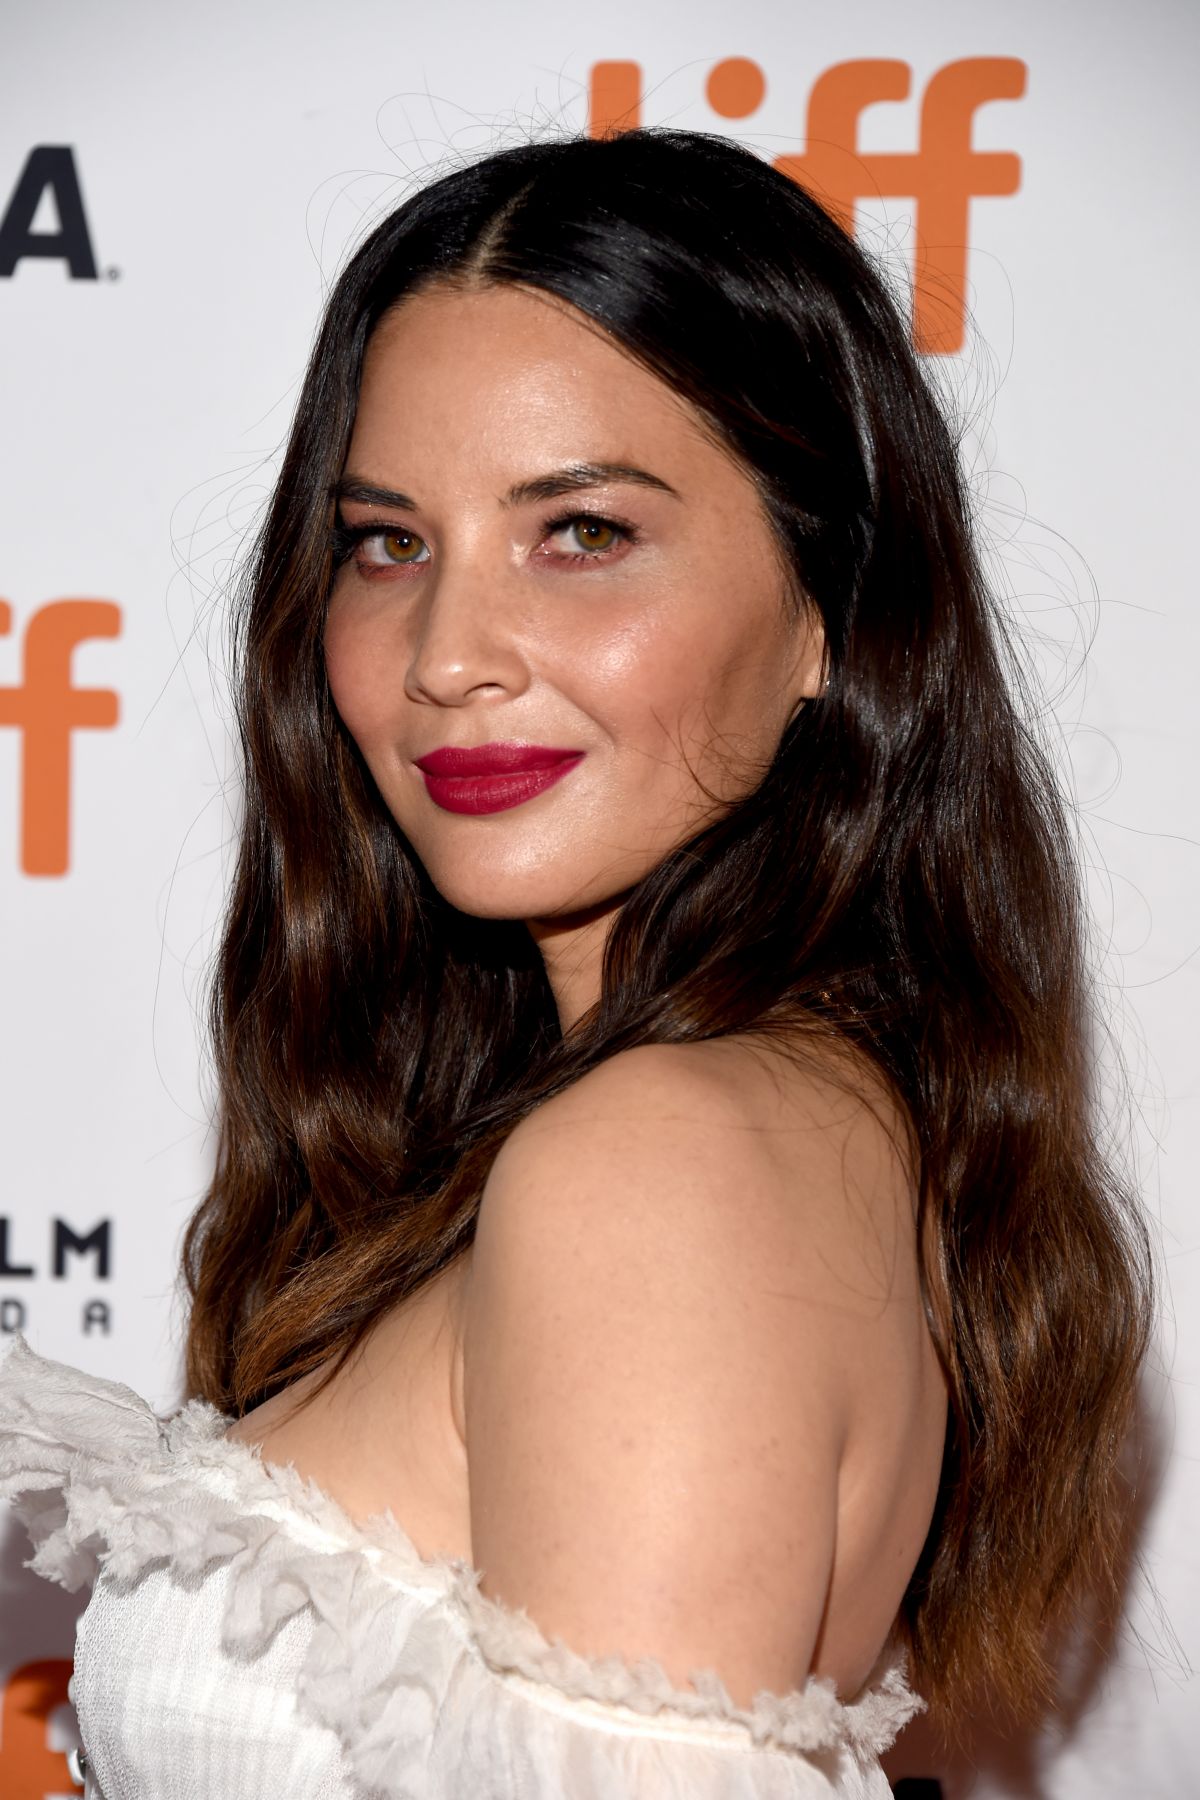 Olivia Munn Reveals New Details About Alleged Emotional 